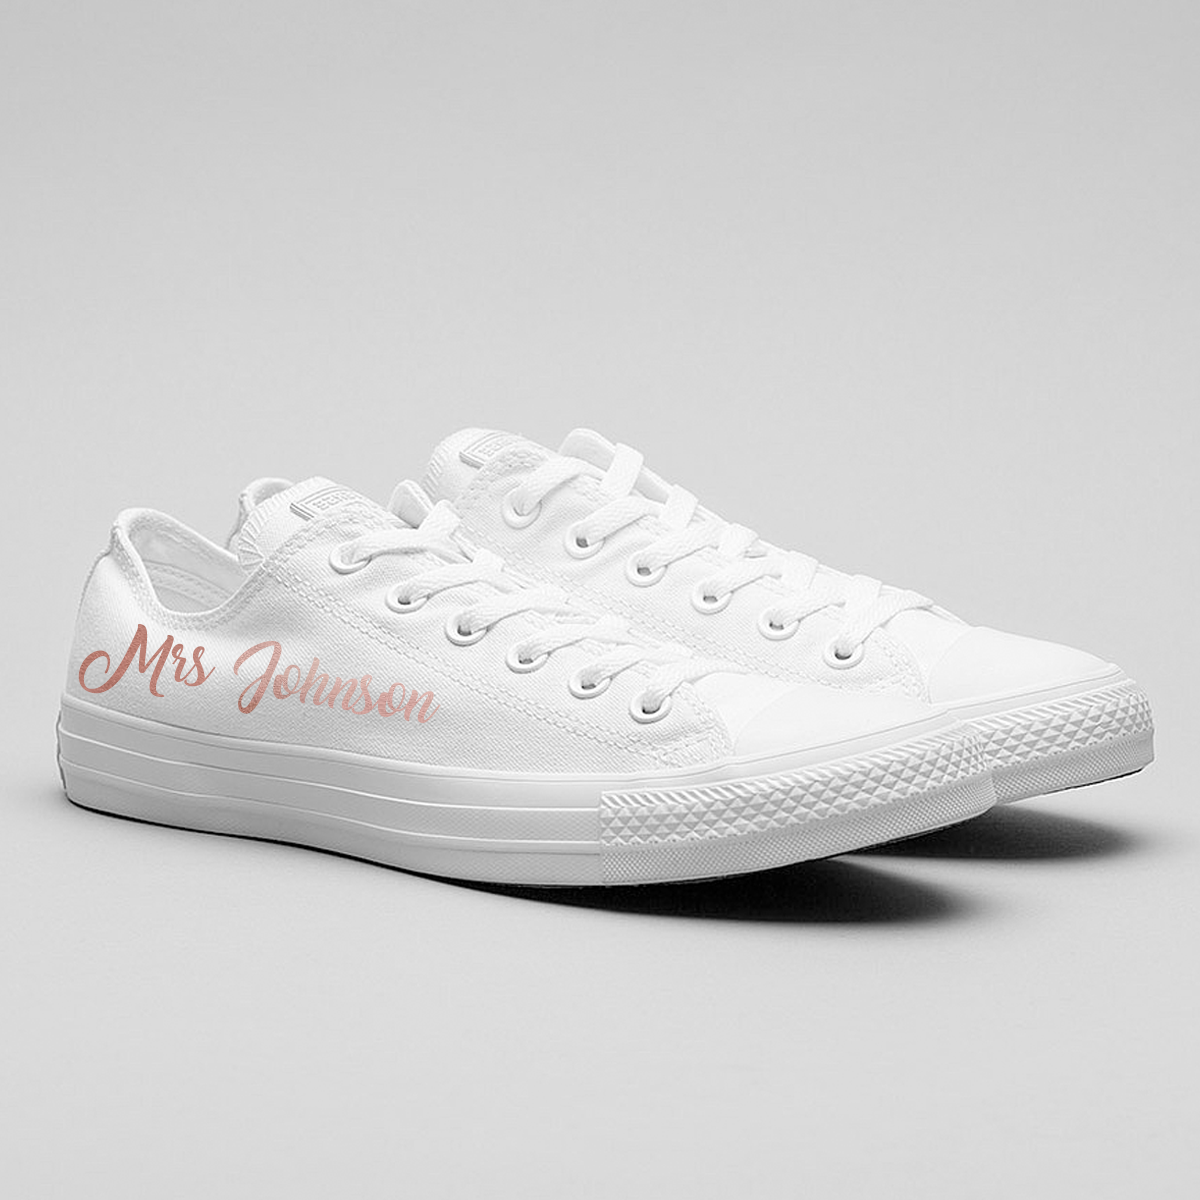 Personalised White Converse All Star Canvas Wedding Shoes